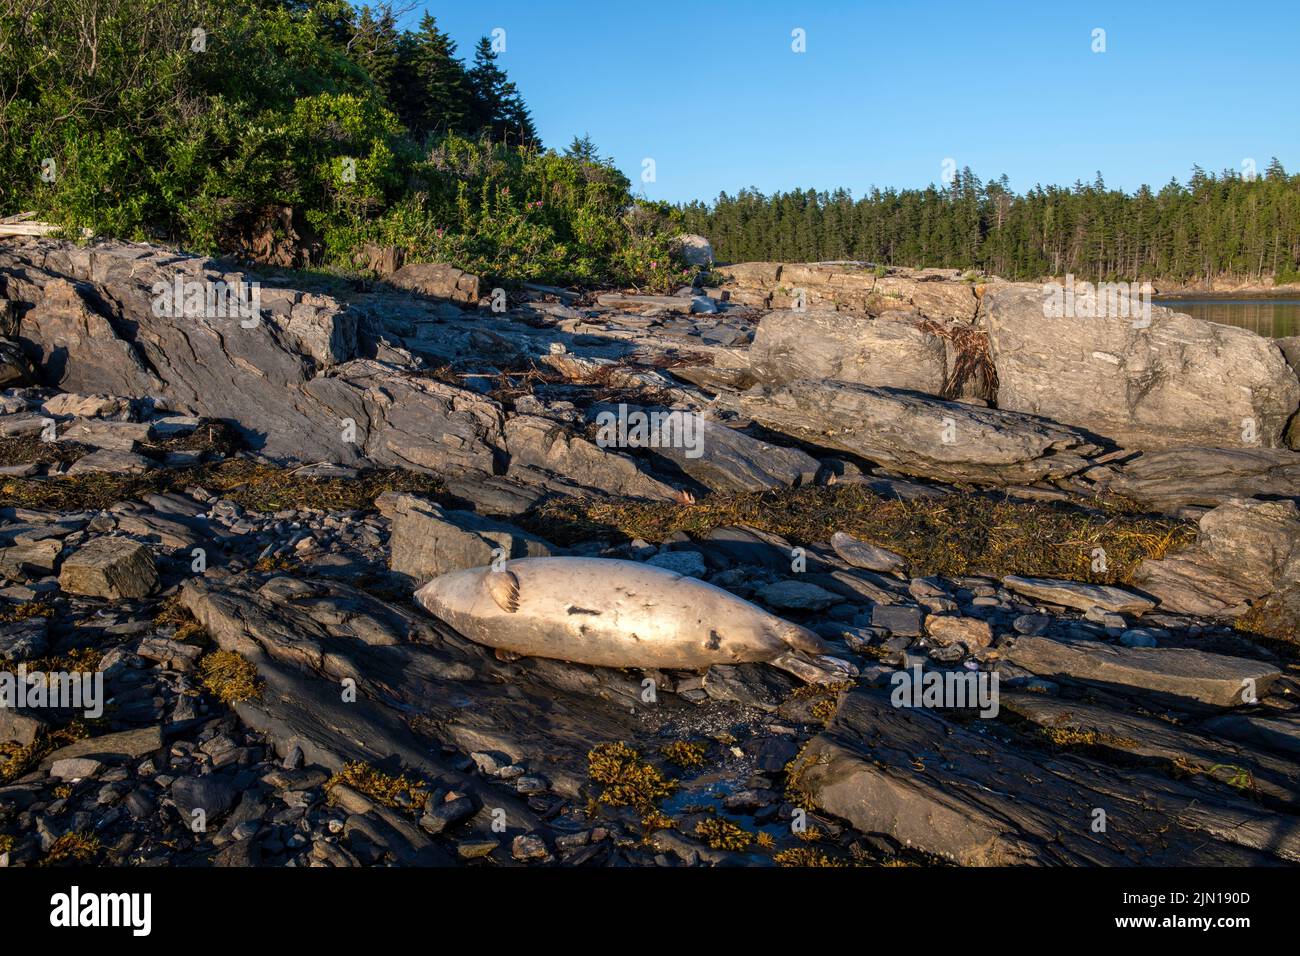 July 6, 2022.  7:32pm.  Dead seal washed up in Gulf of Maine. Bird flu has jumped to seals and some are dying. Stock Photo